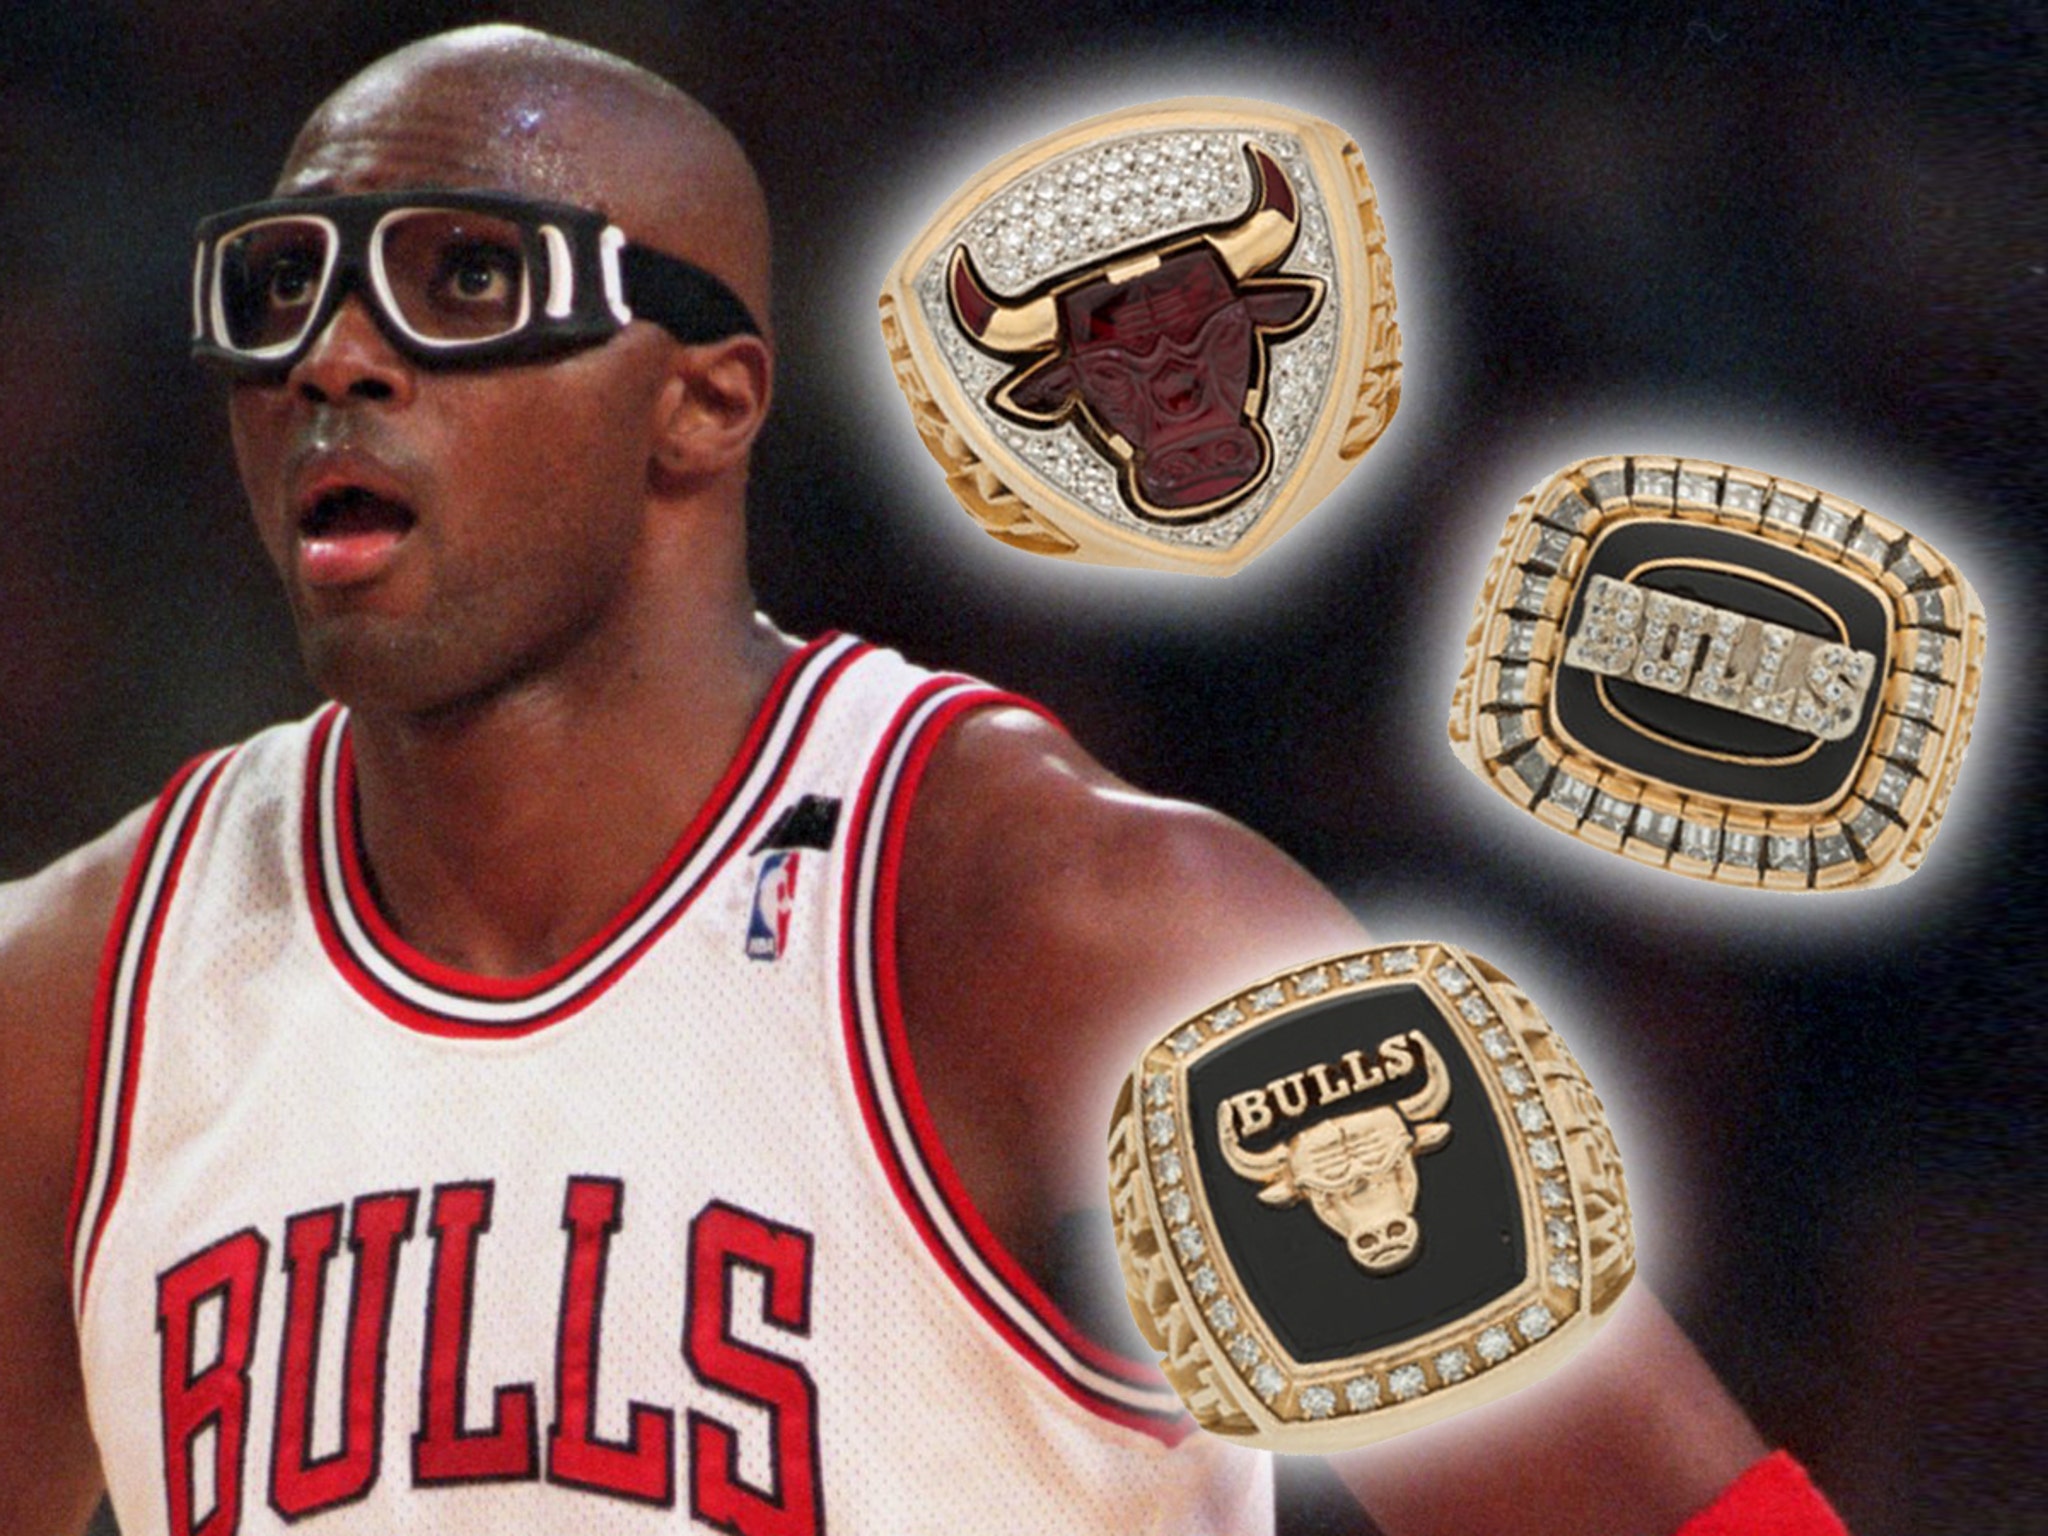 Former Chicago Bulls forward Horace Grant remembers a key play